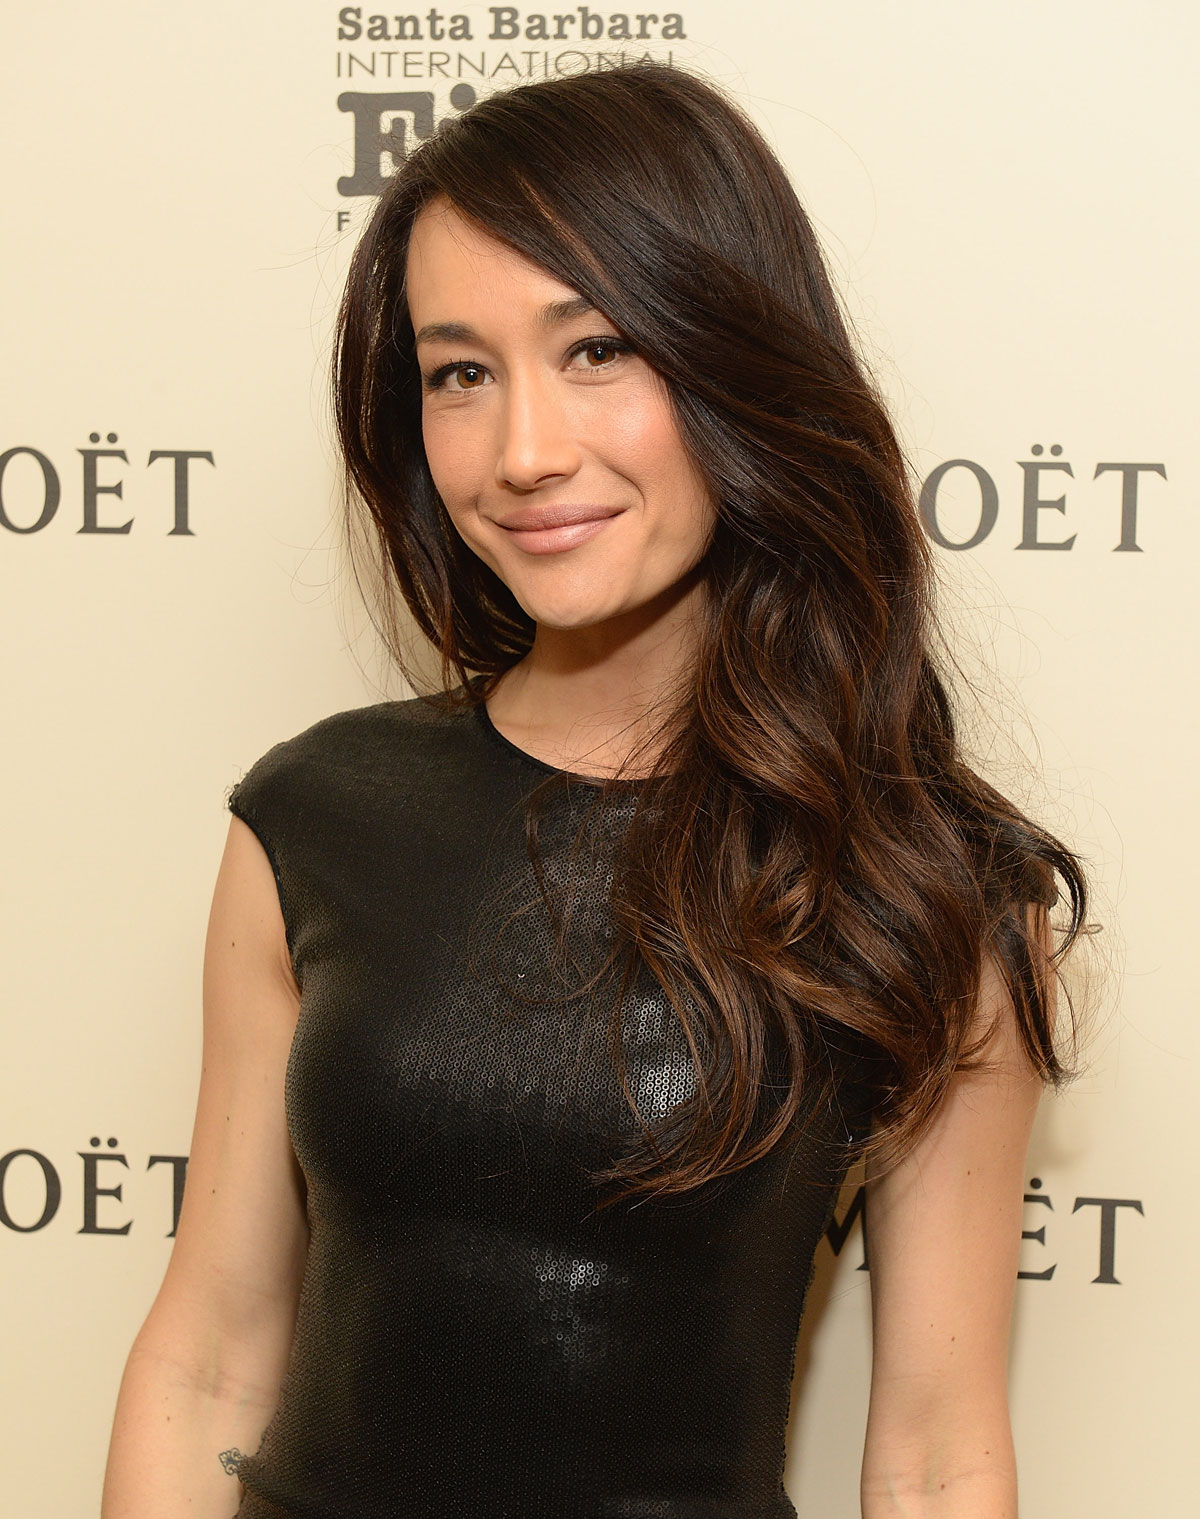 Maggie Q attends The Moet & Chandon Lounge